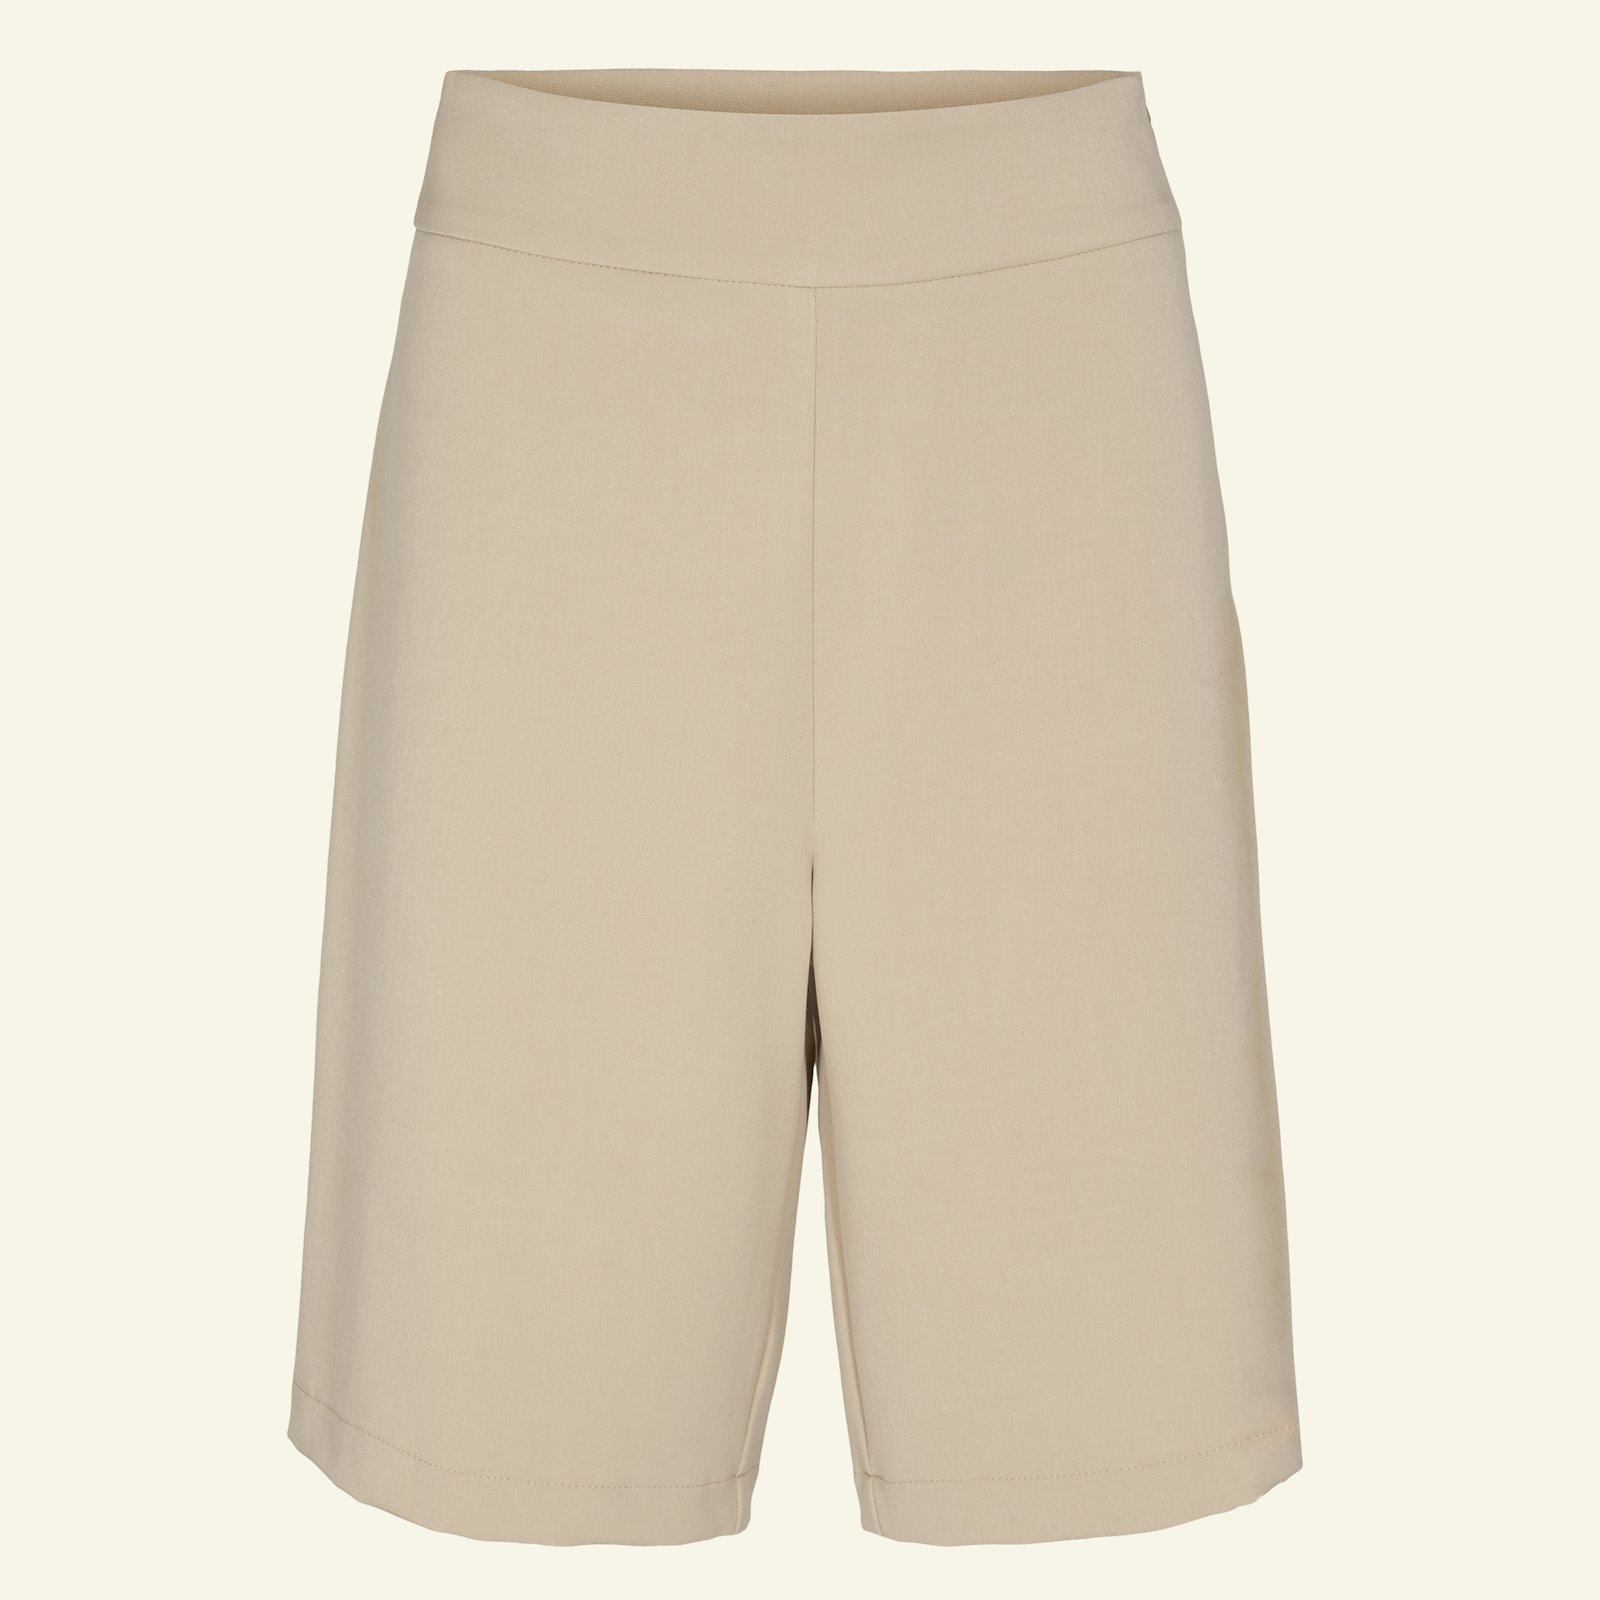 Highwaist and wide legs trousers, 40/12 p20052_460857_sskit